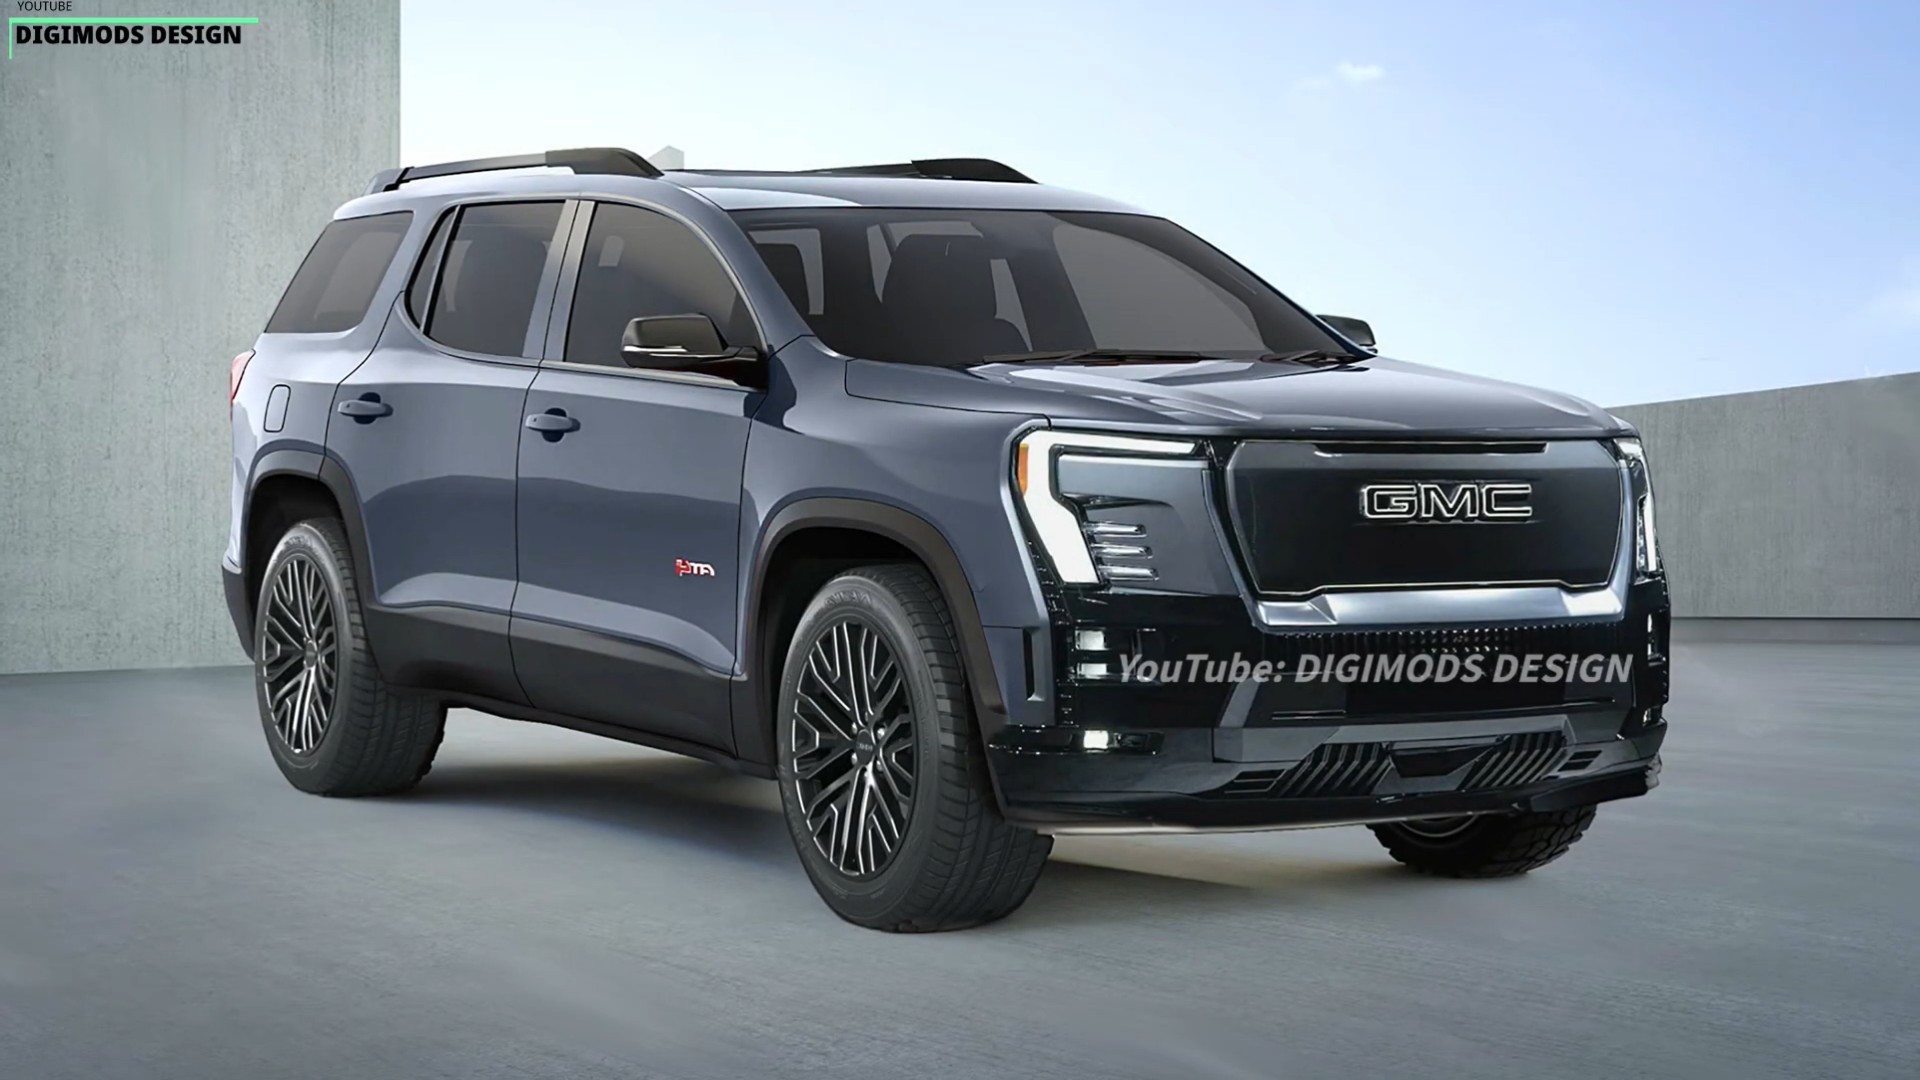 Imagined 2025 GMC Acadia Adopts the Sierra EV's Styling but Keeps ICE